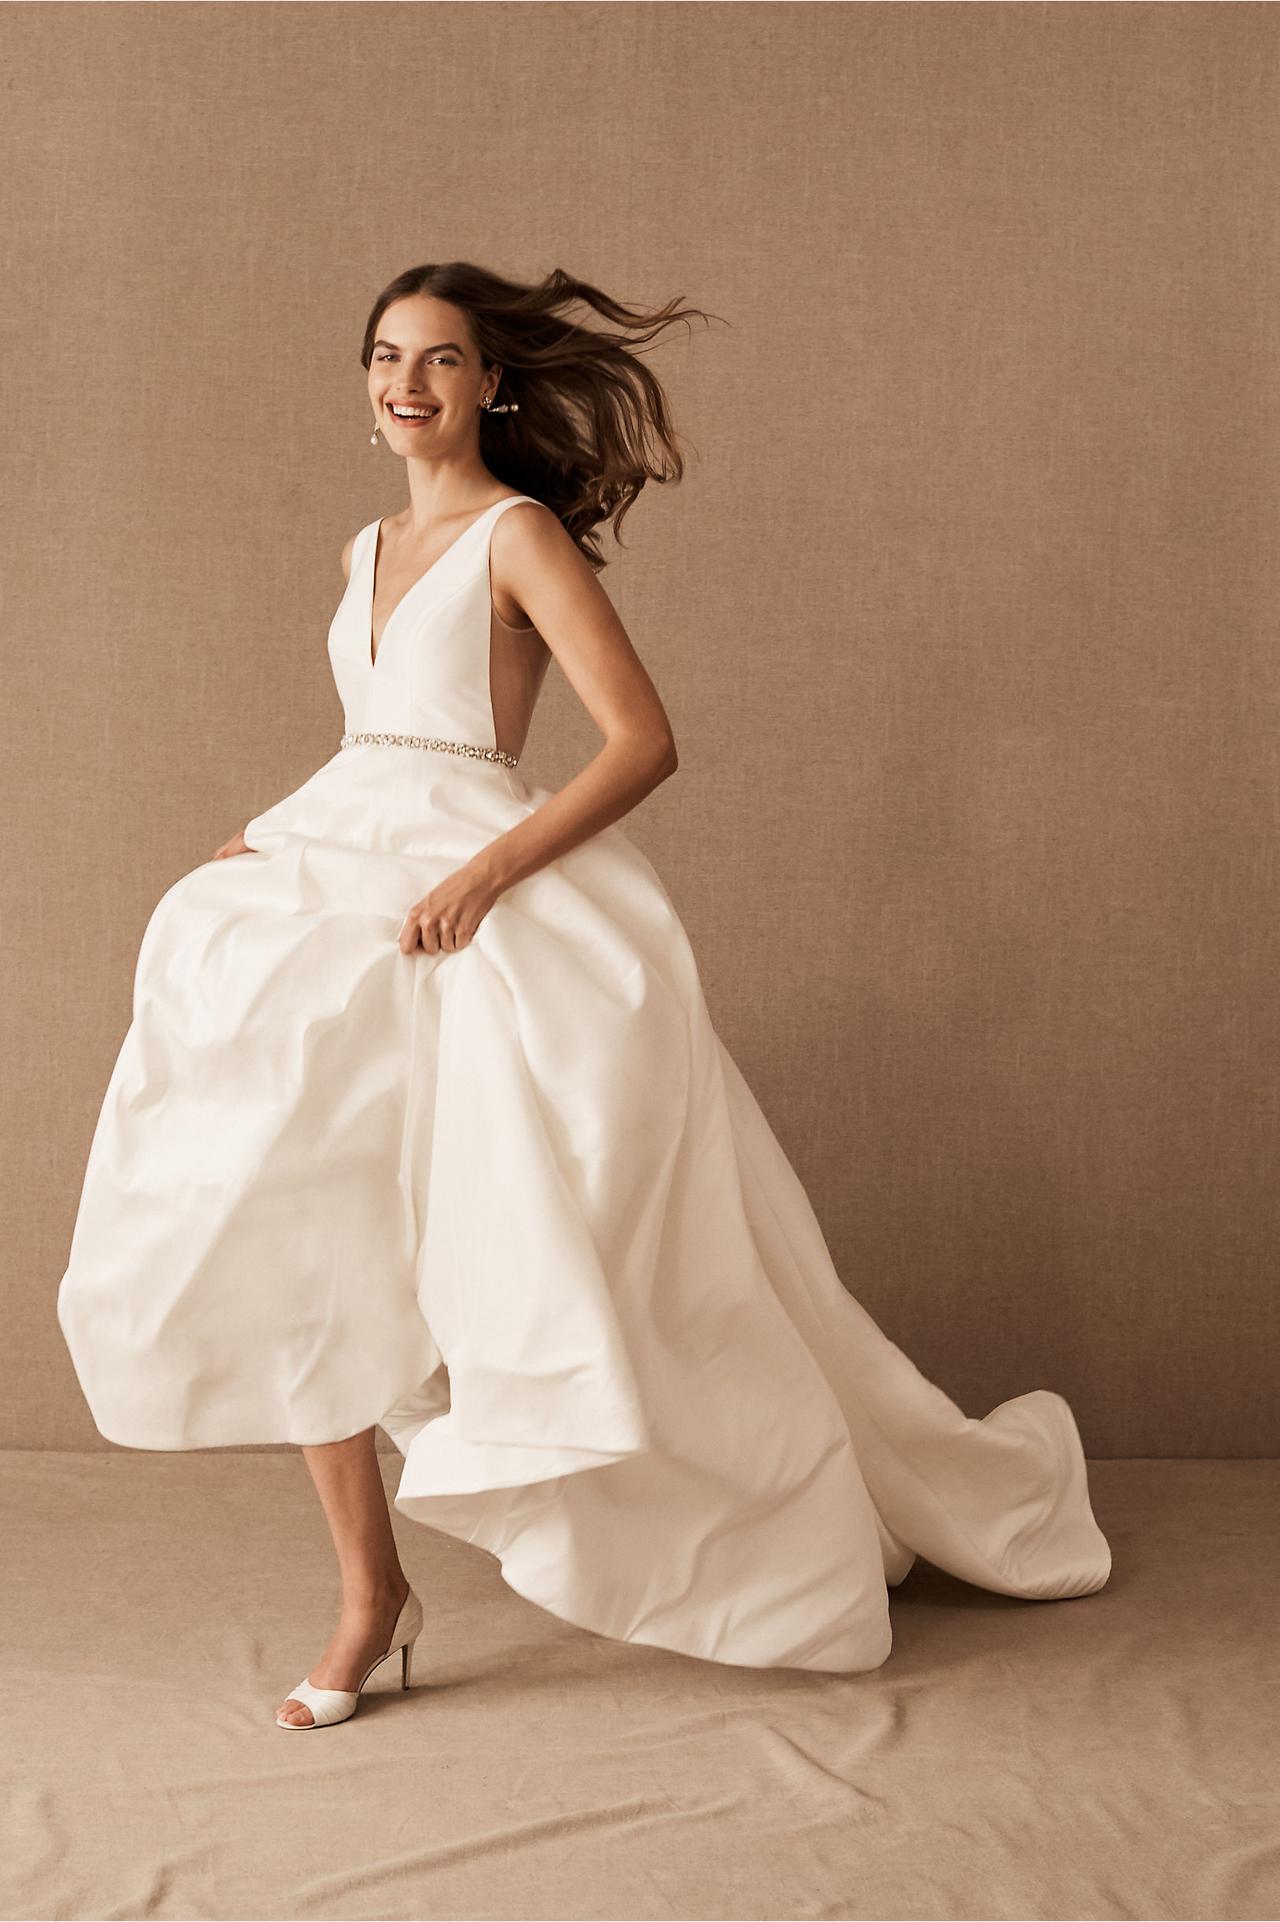 Planning A Courthouse Wedding? Here's 5 Bridal Outfits To Shop